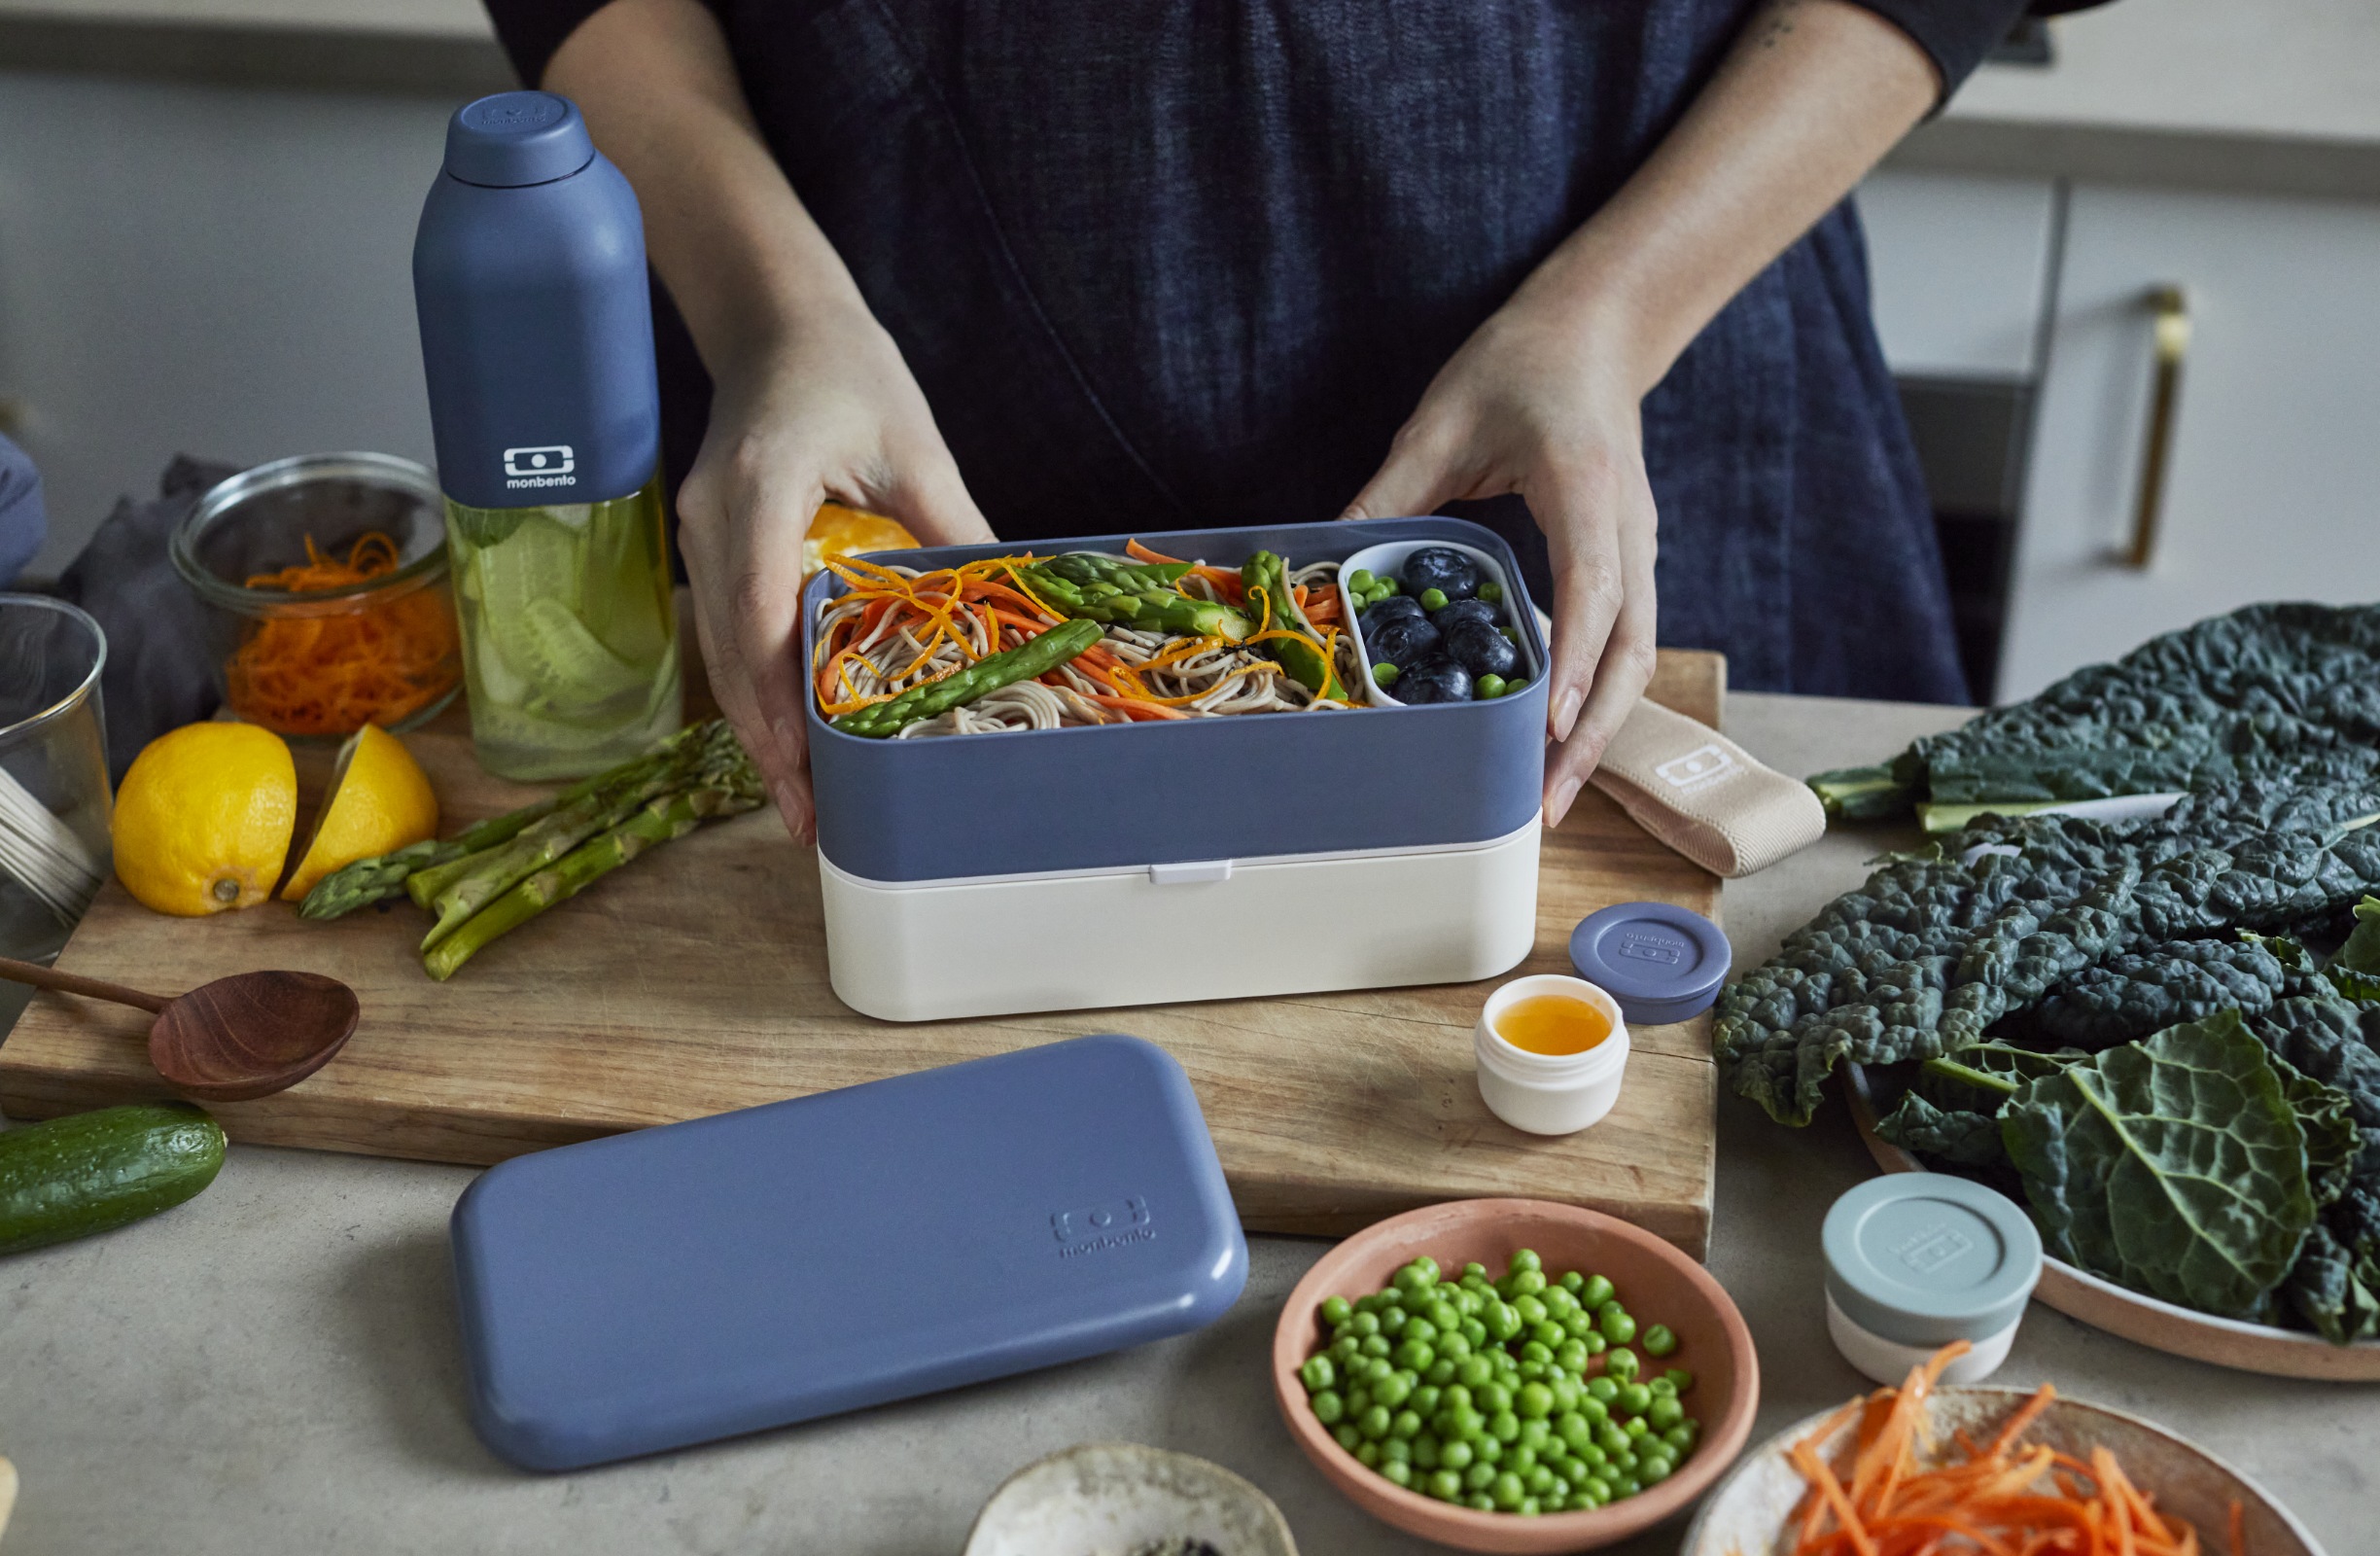 About the french brand monbento - Monbento